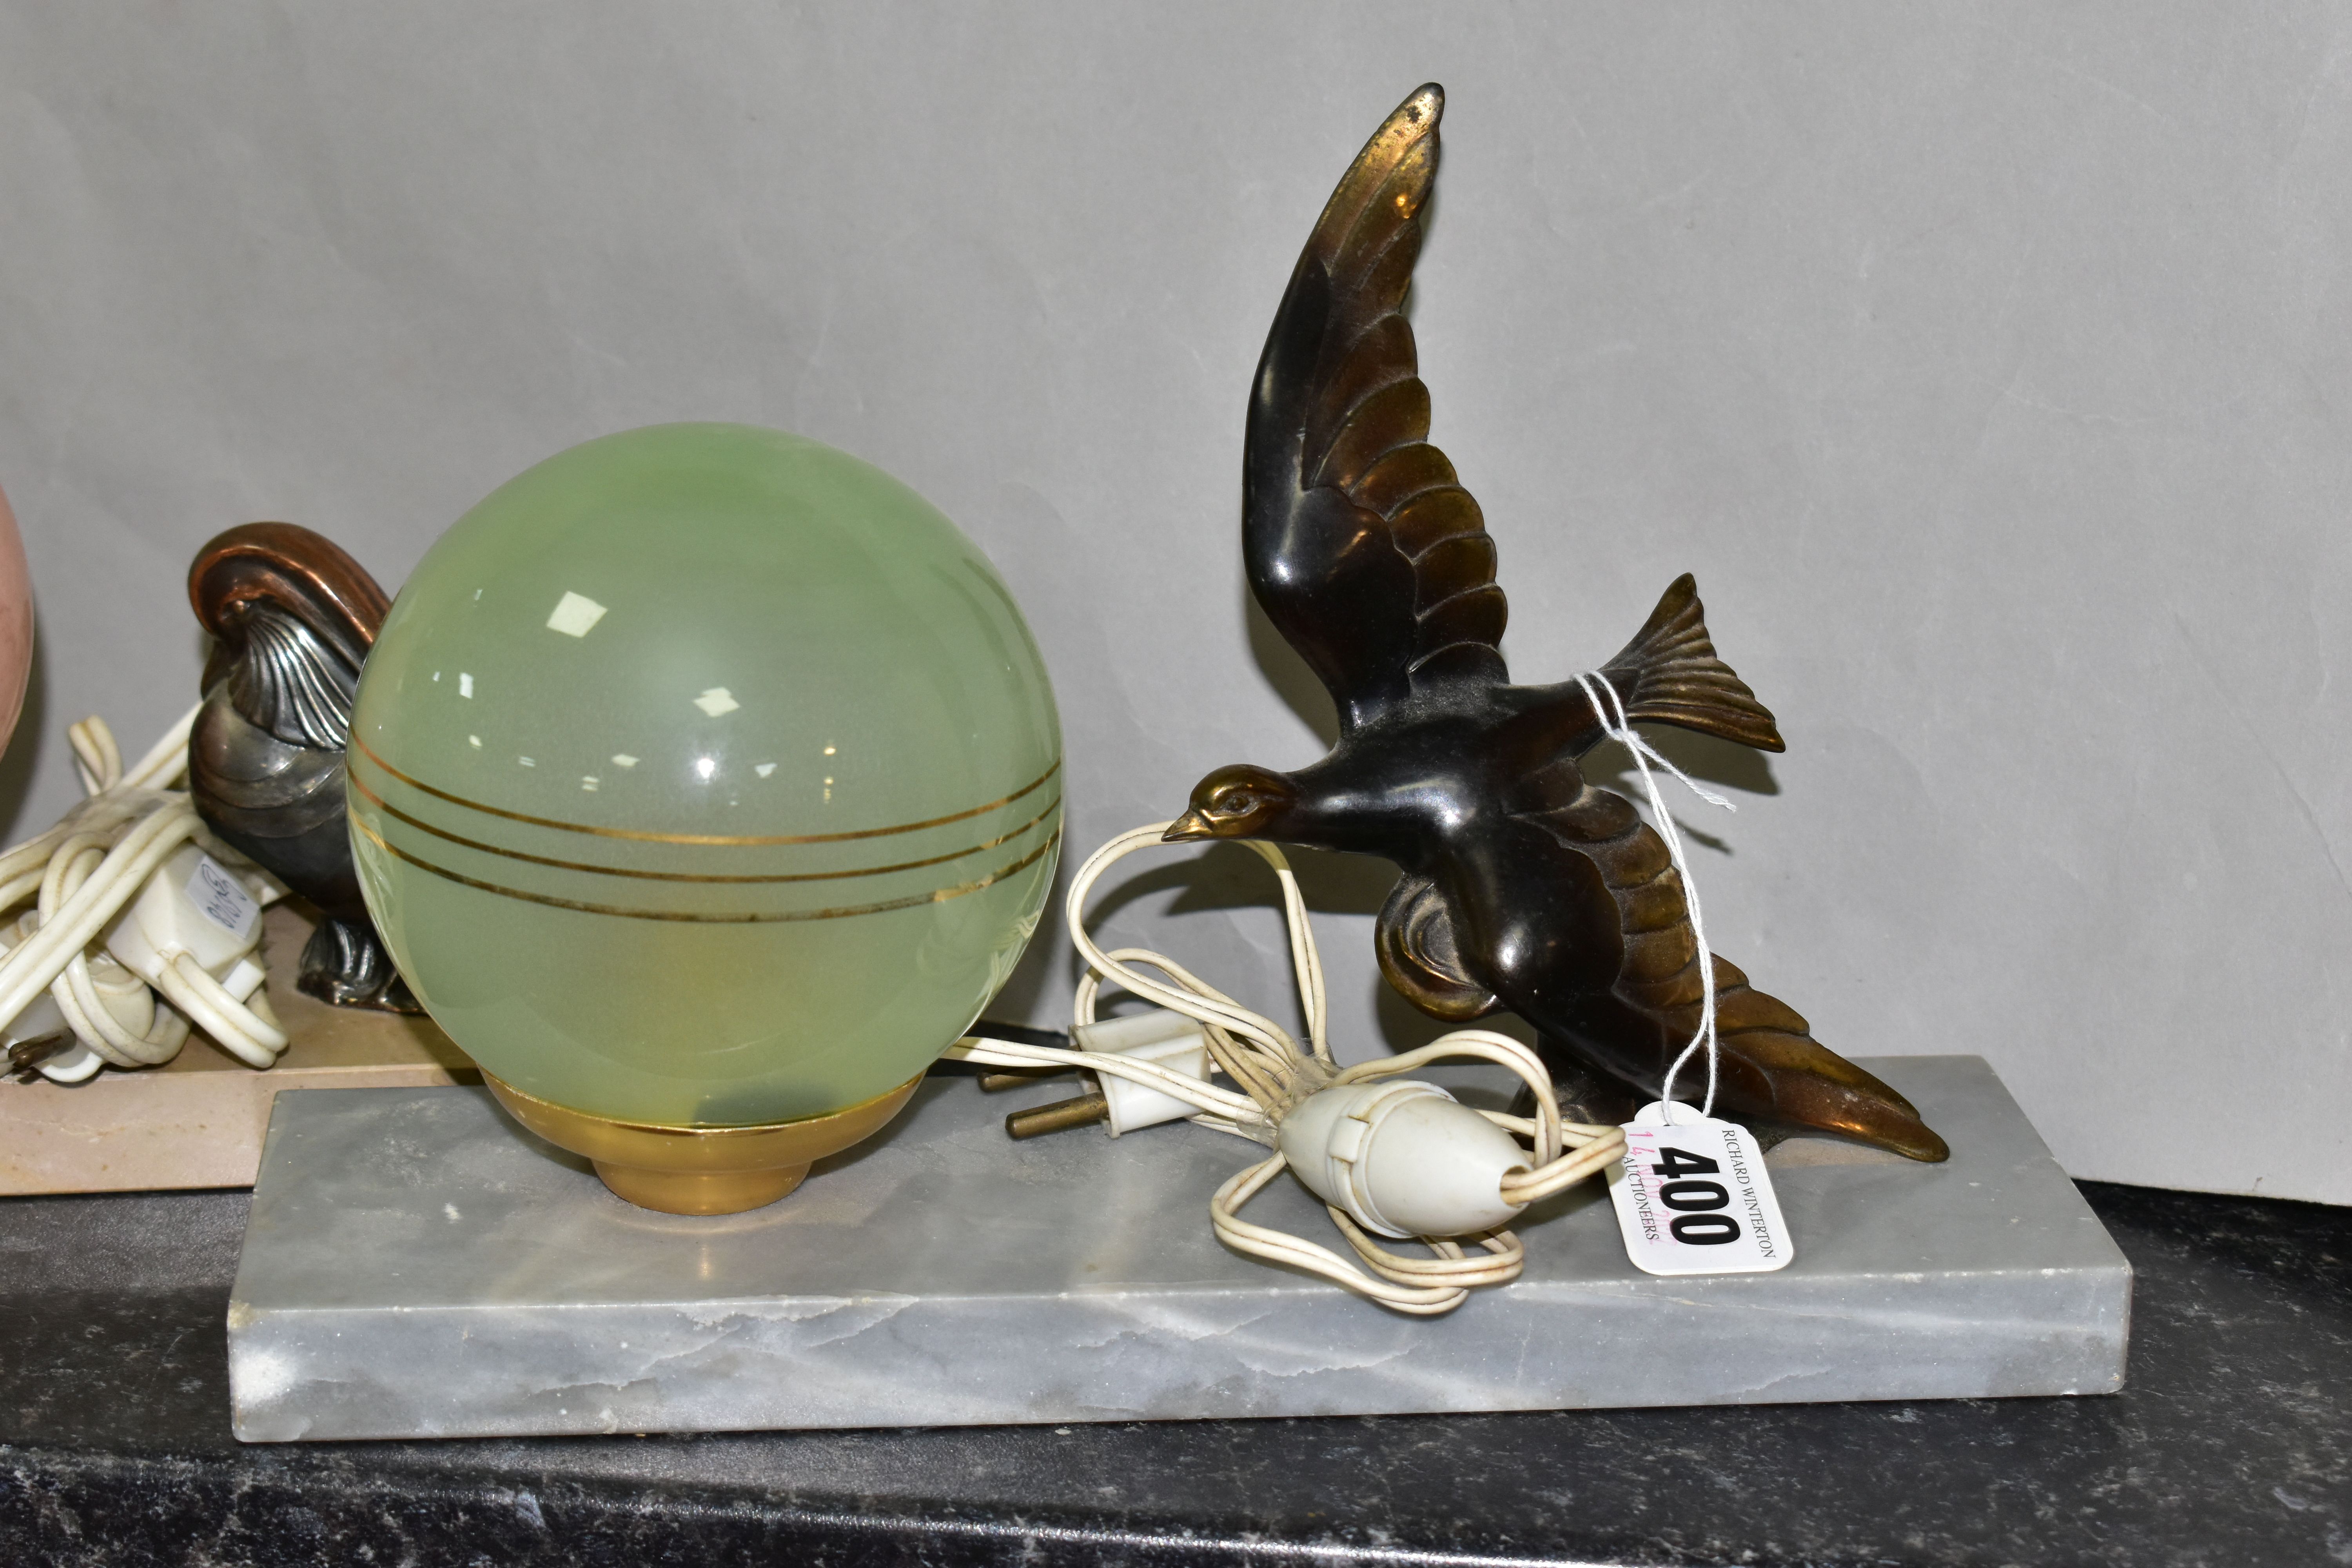 TWO FRENCH ART DECO TABLE LAMPS, one with green glass spherical shade and brass figure of a bird - Image 2 of 5